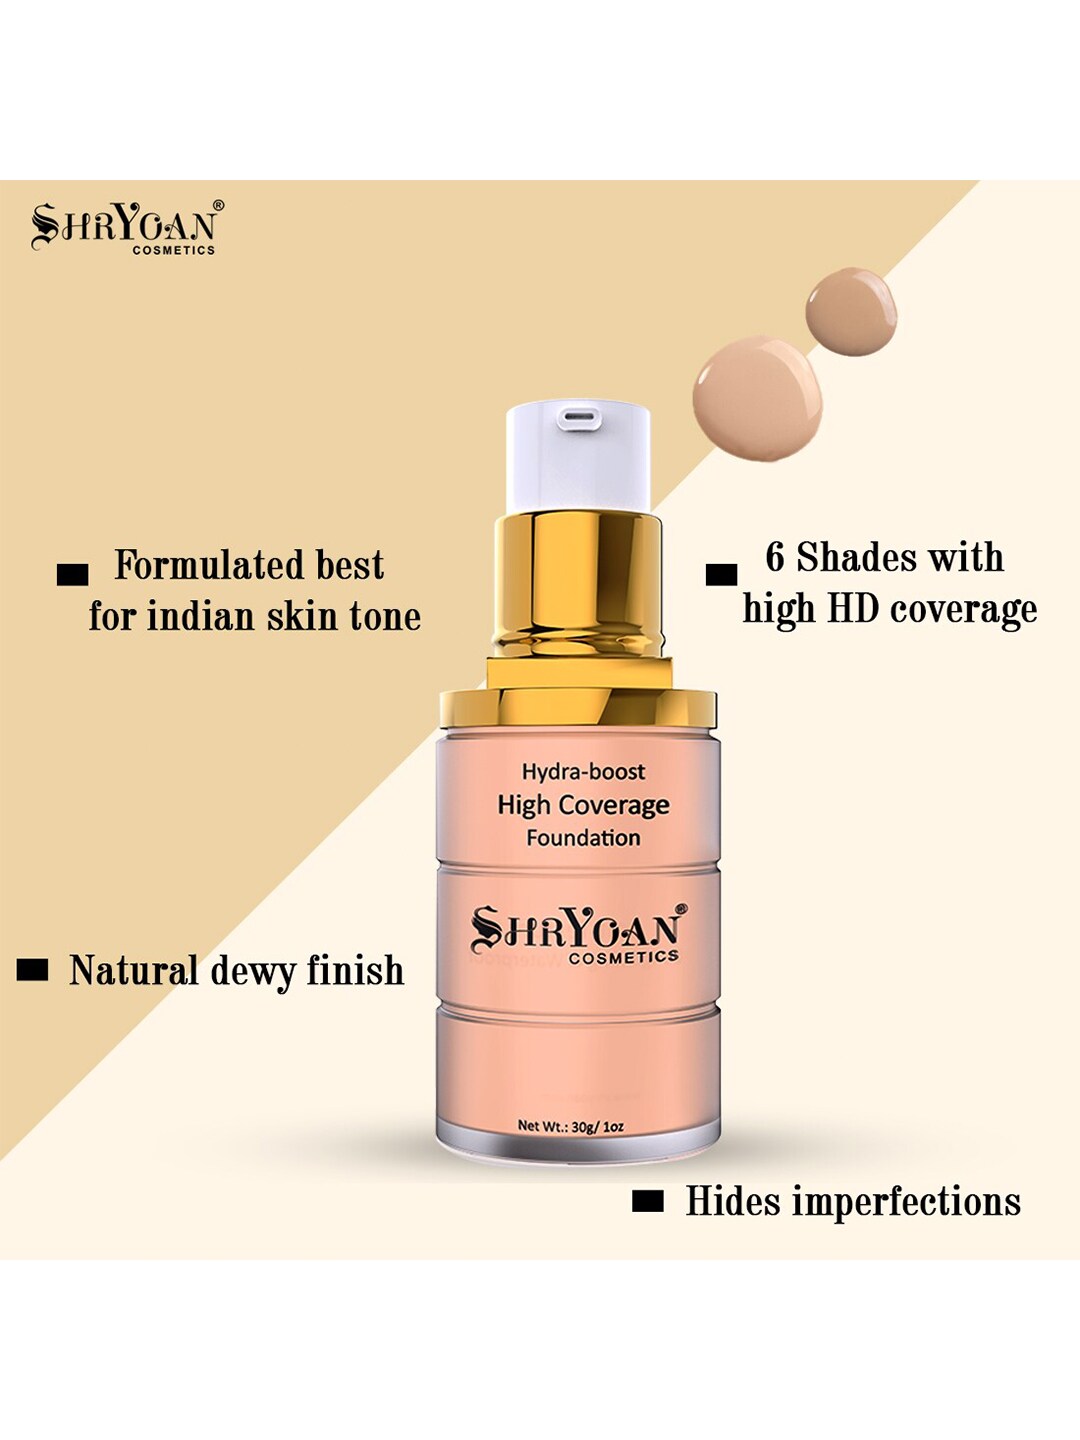 SHRYOAN Beige Hydra-boost High Coverage Foundation Price in India